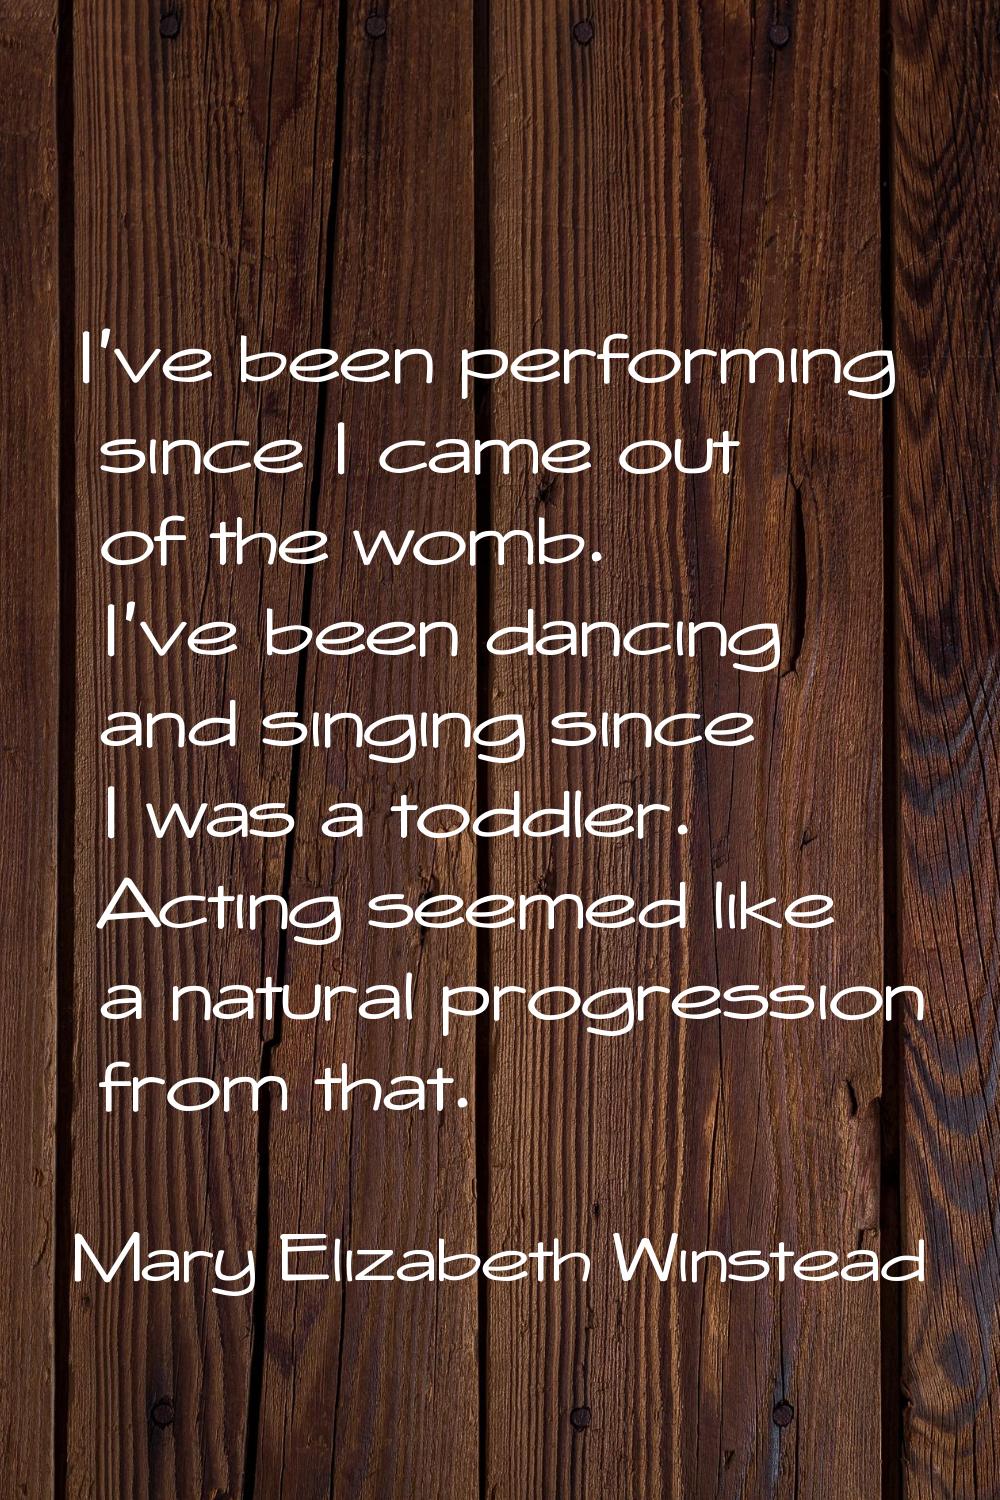 I've been performing since I came out of the womb. I've been dancing and singing since I was a todd